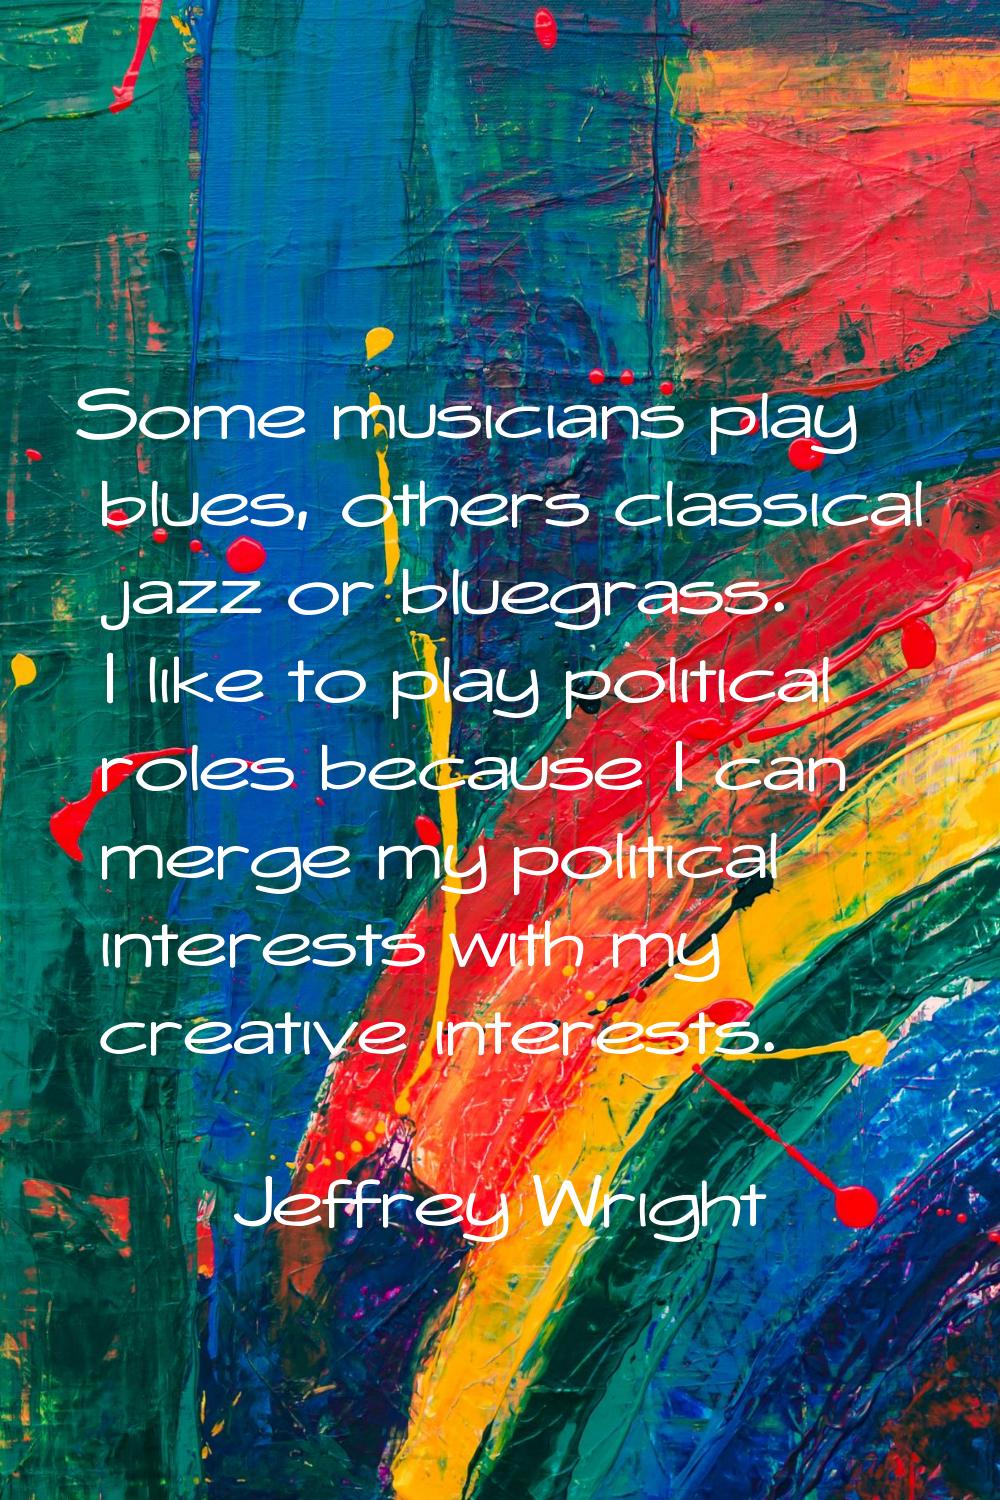 Some musicians play blues, others classical jazz or bluegrass. I like to play political roles becau